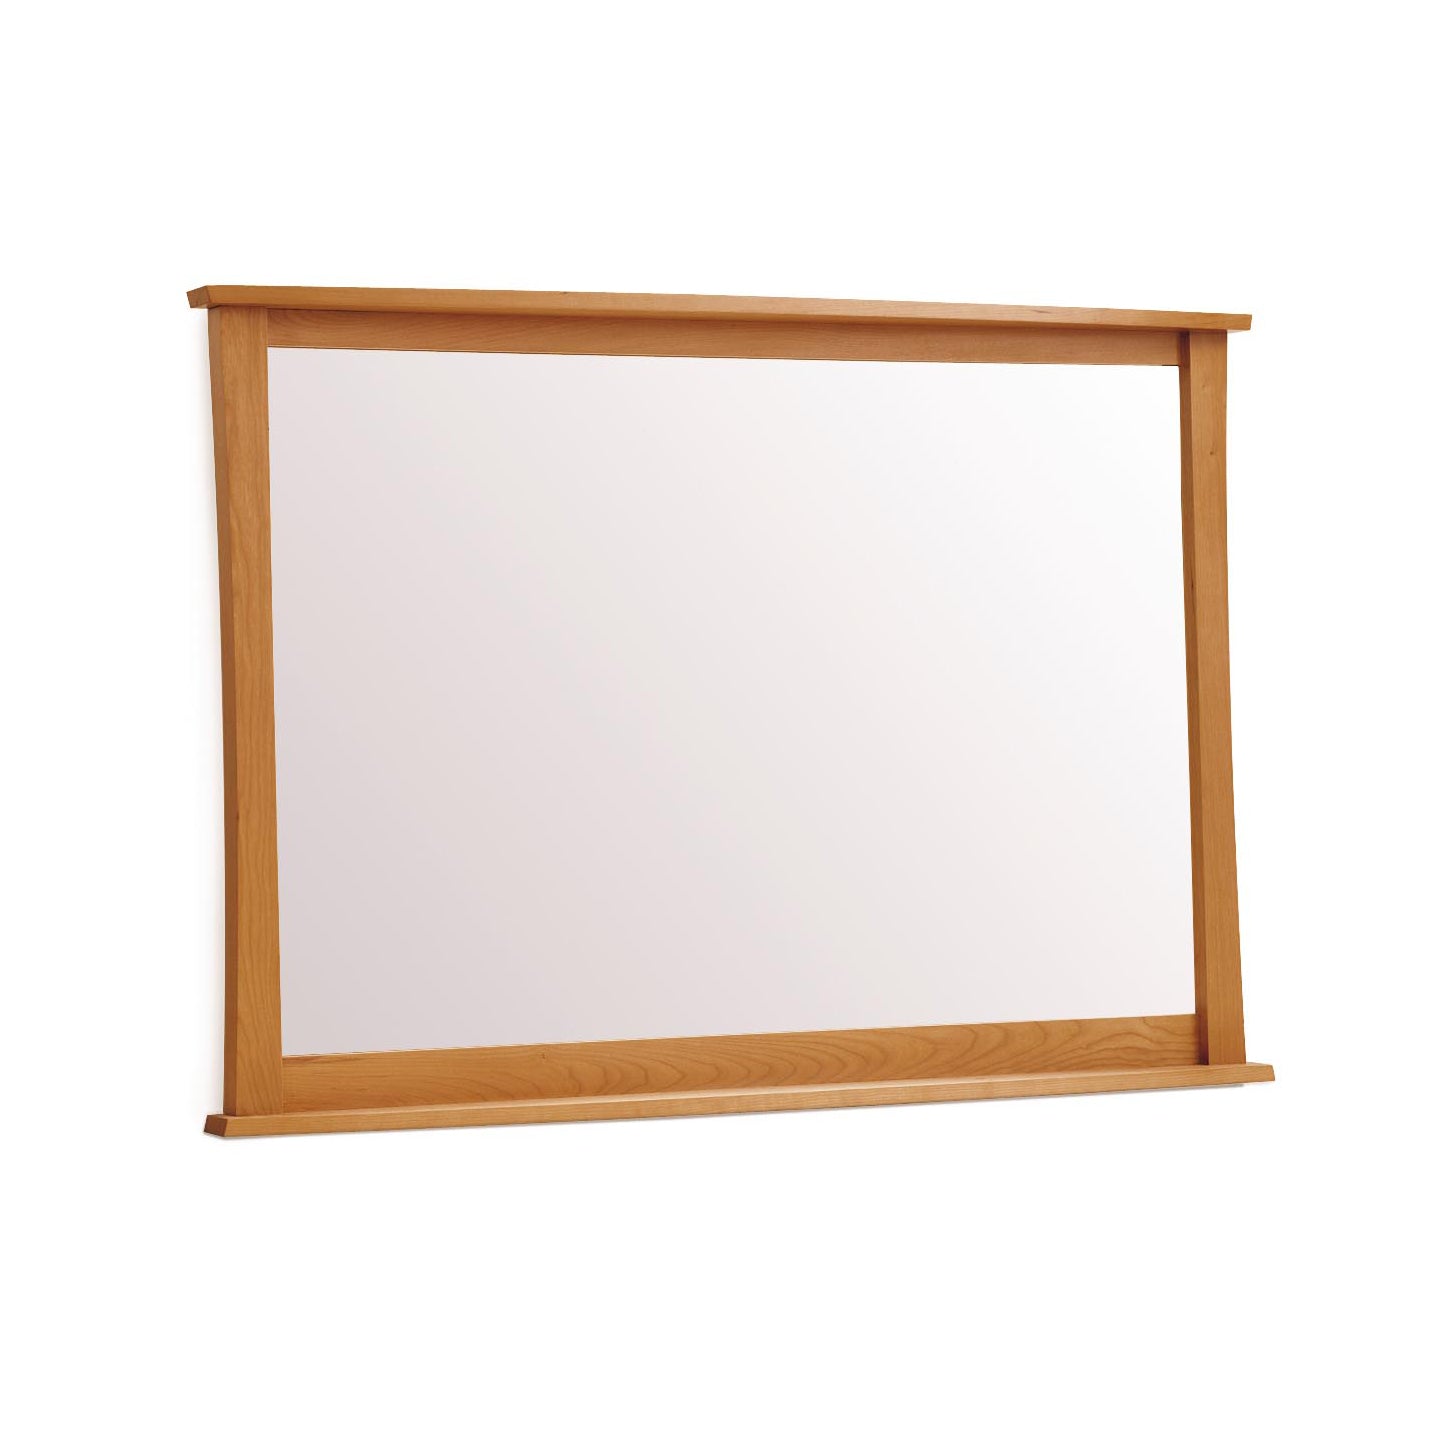 A Copeland Furniture Berkeley Wall Mirror on a white background.